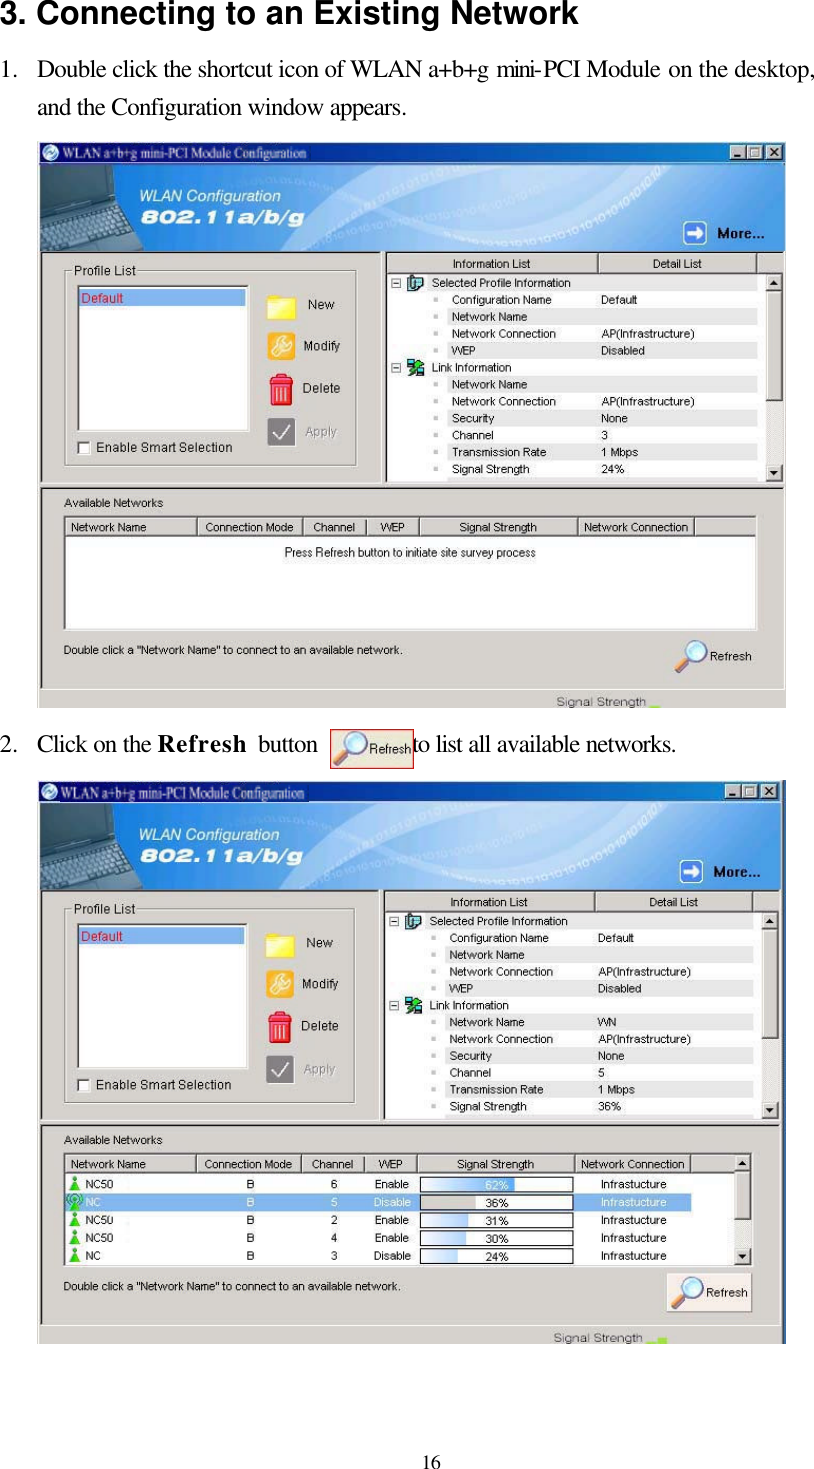  16 3. Connecting to an Existing Network 1.  Double click the shortcut icon of WLAN a+b+g mini-PCI Module on the desktop, and the Configuration window appears.   2.  Click on the Refresh button        to list all available networks.    